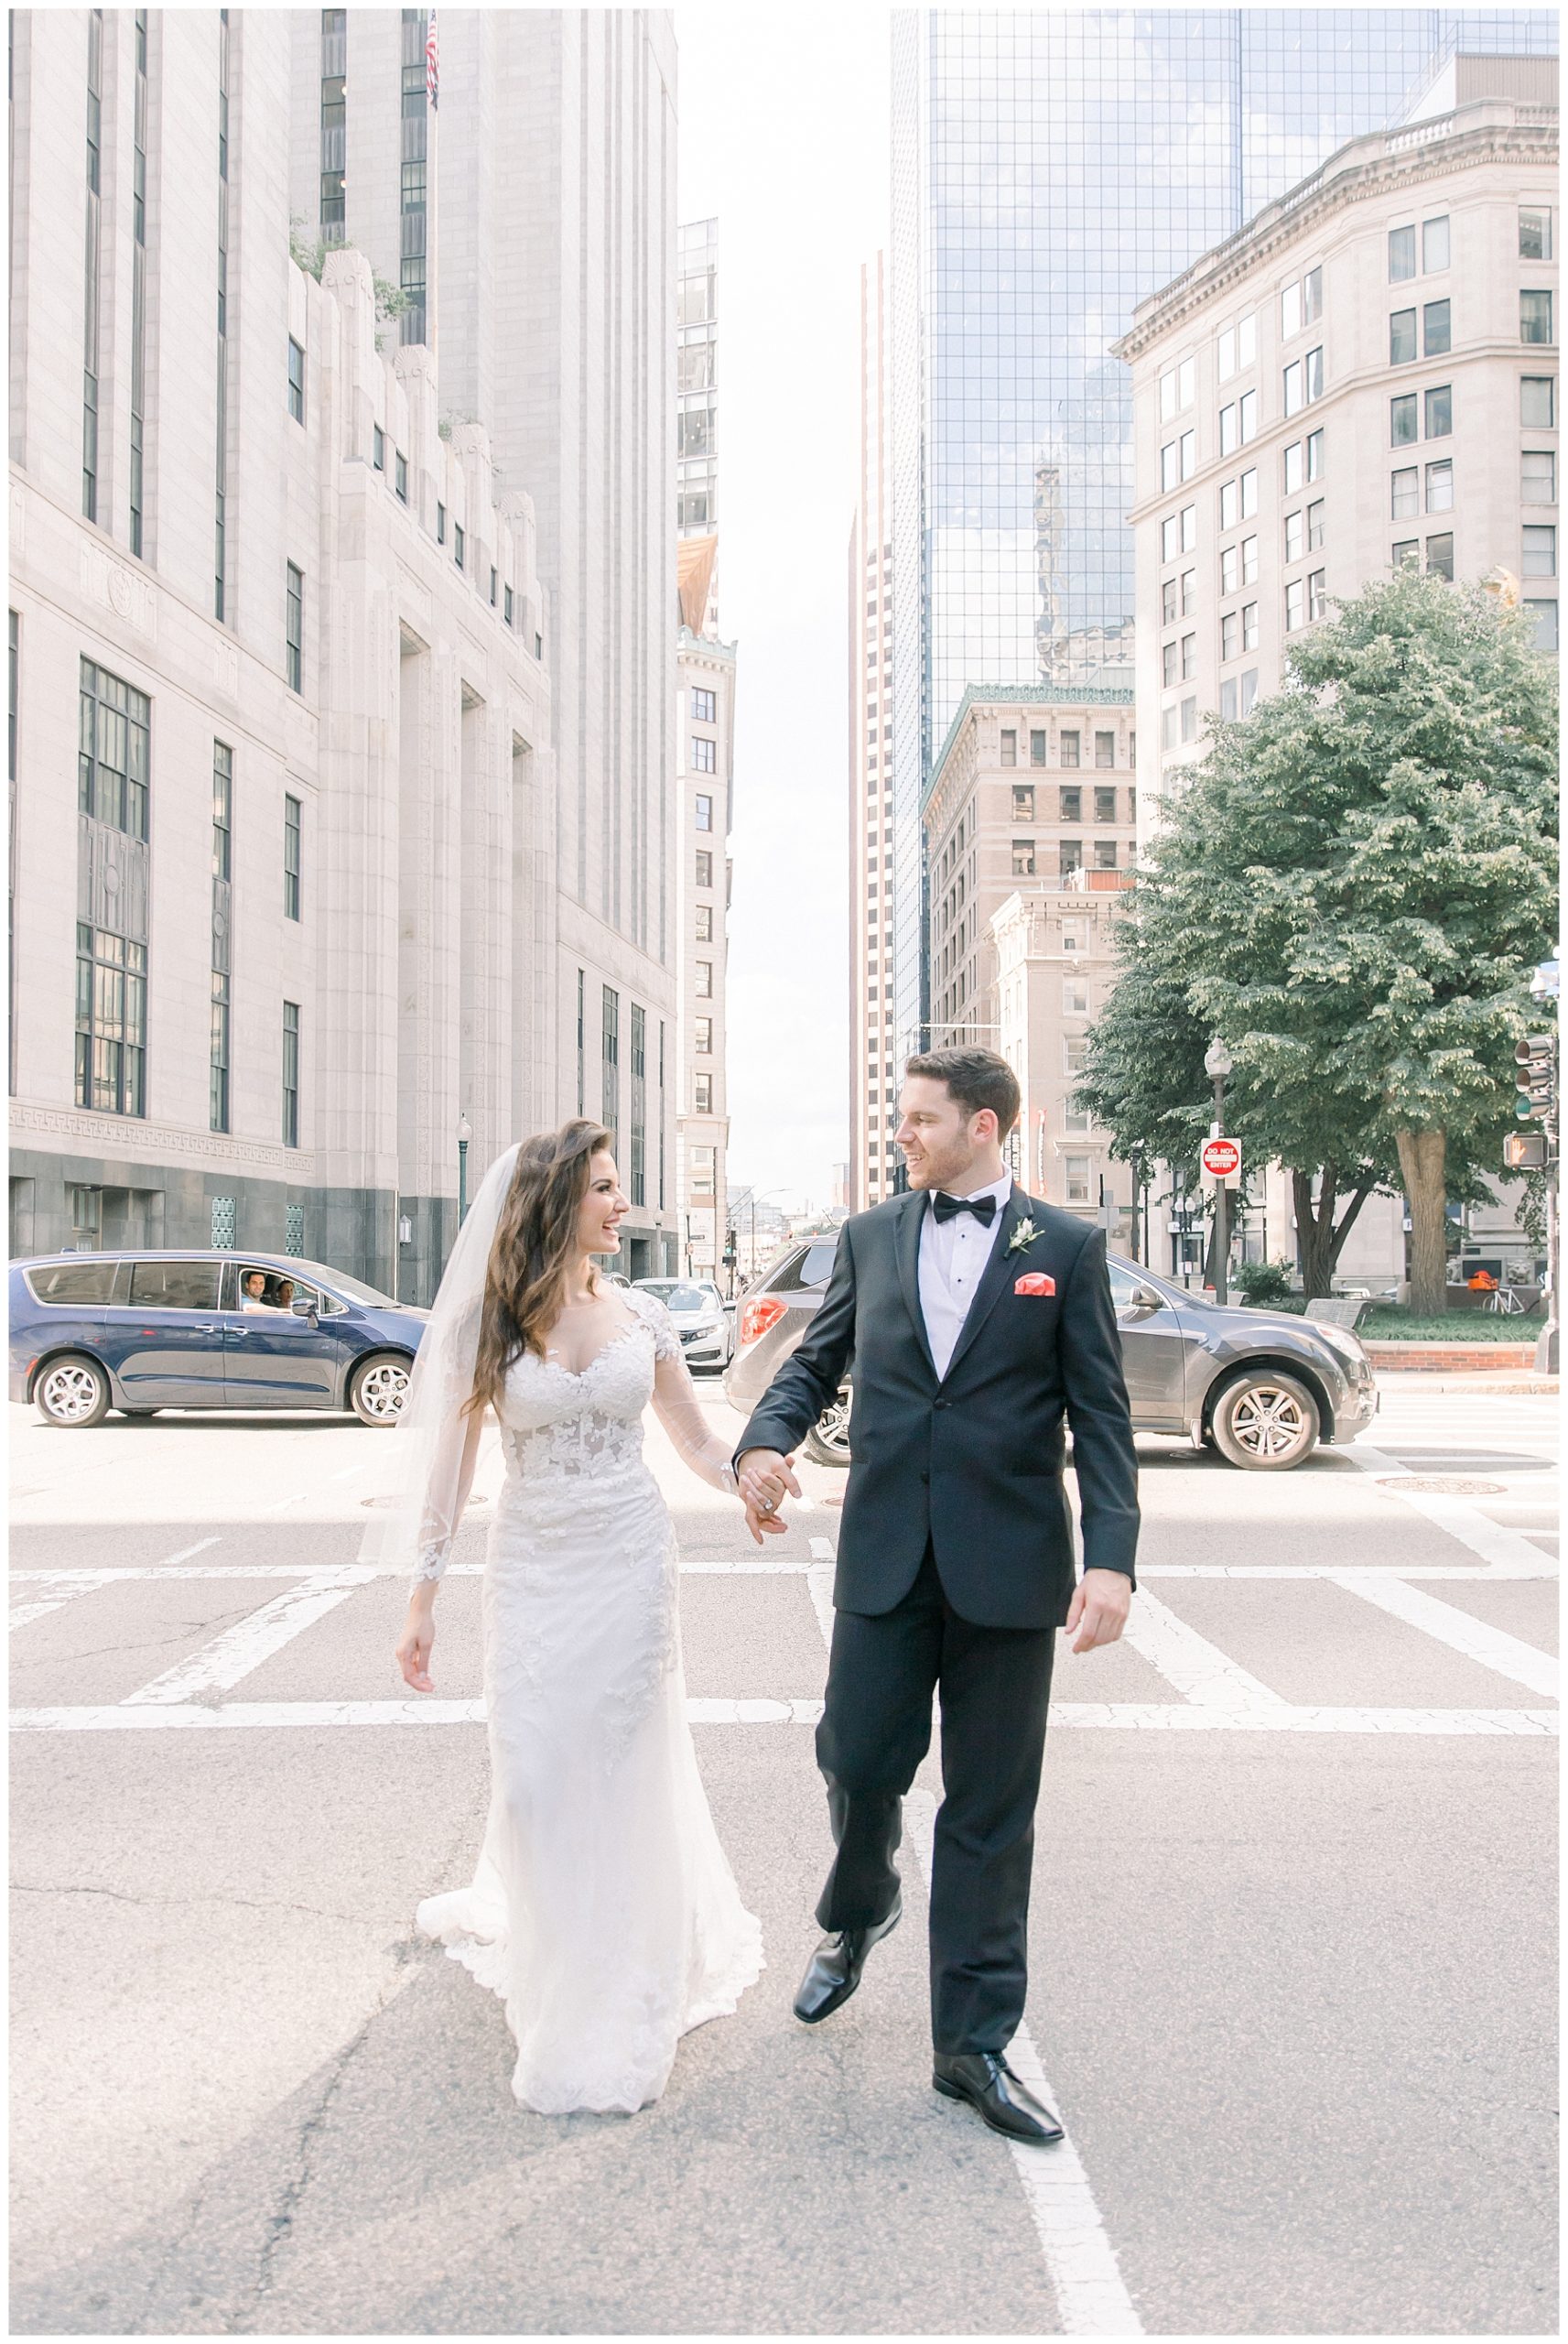 Bride and groom in downtown Boson